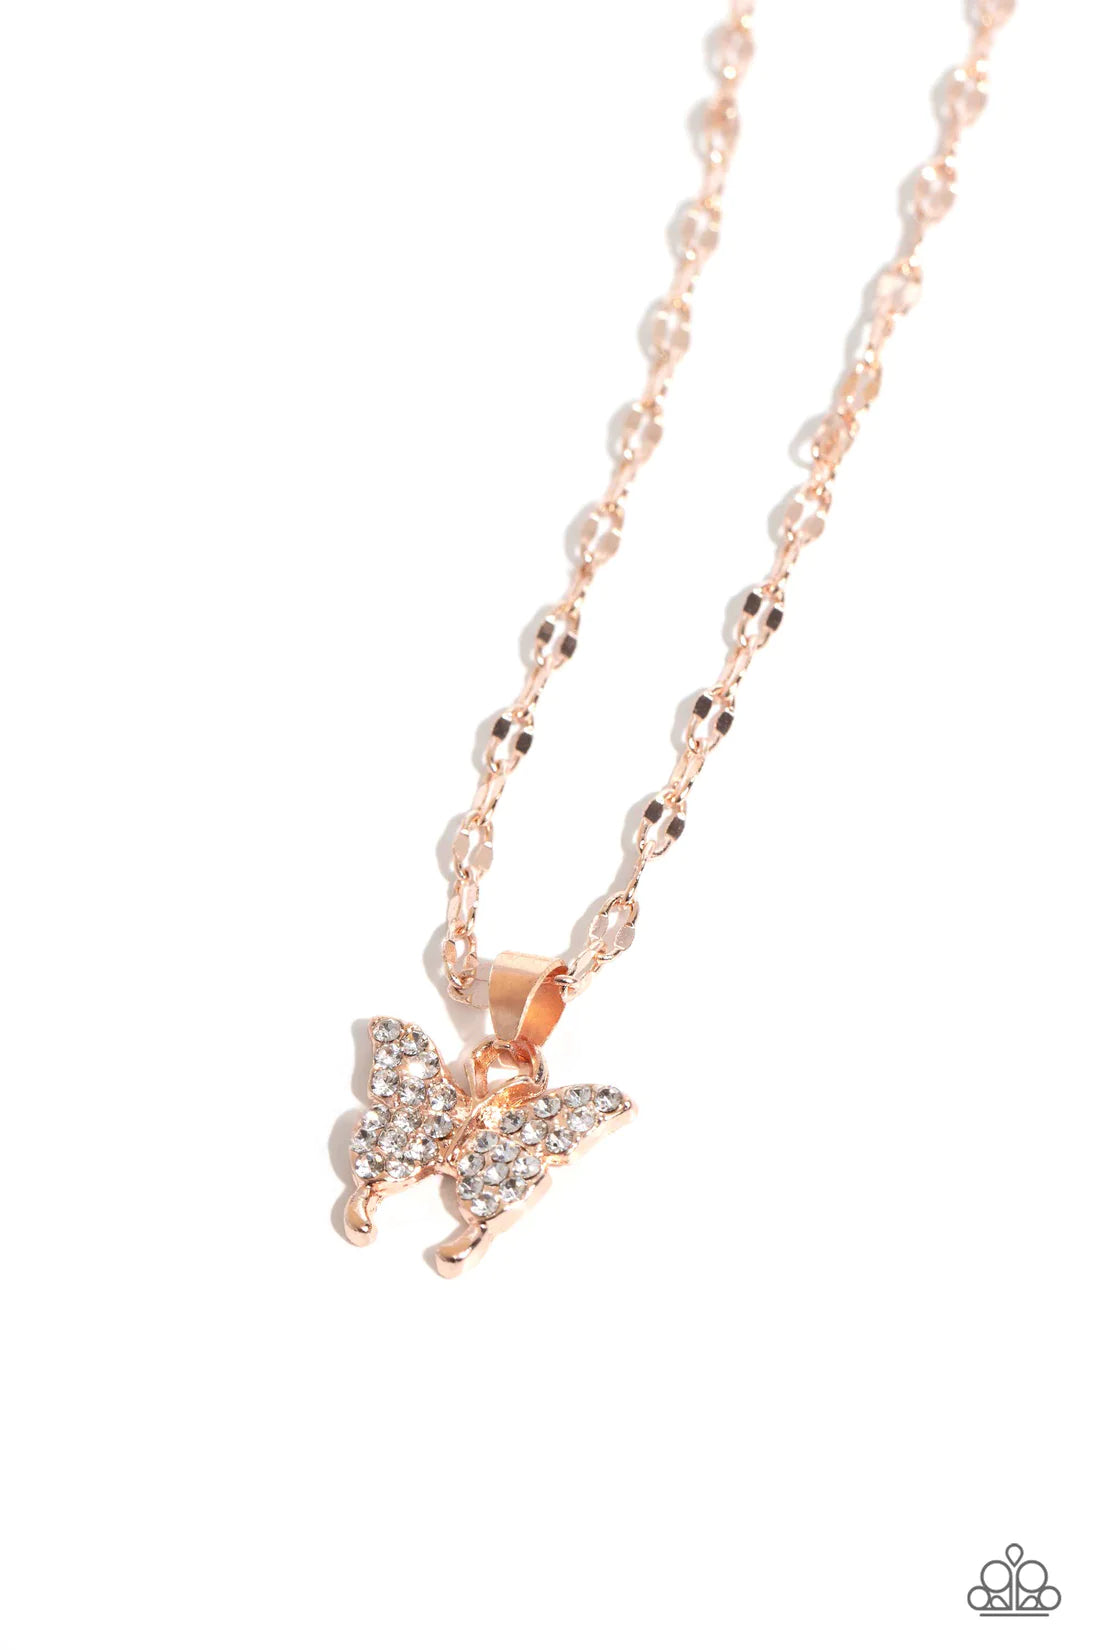 Paparazzi Necklaces - High-Flying Hangout - Rose Gold